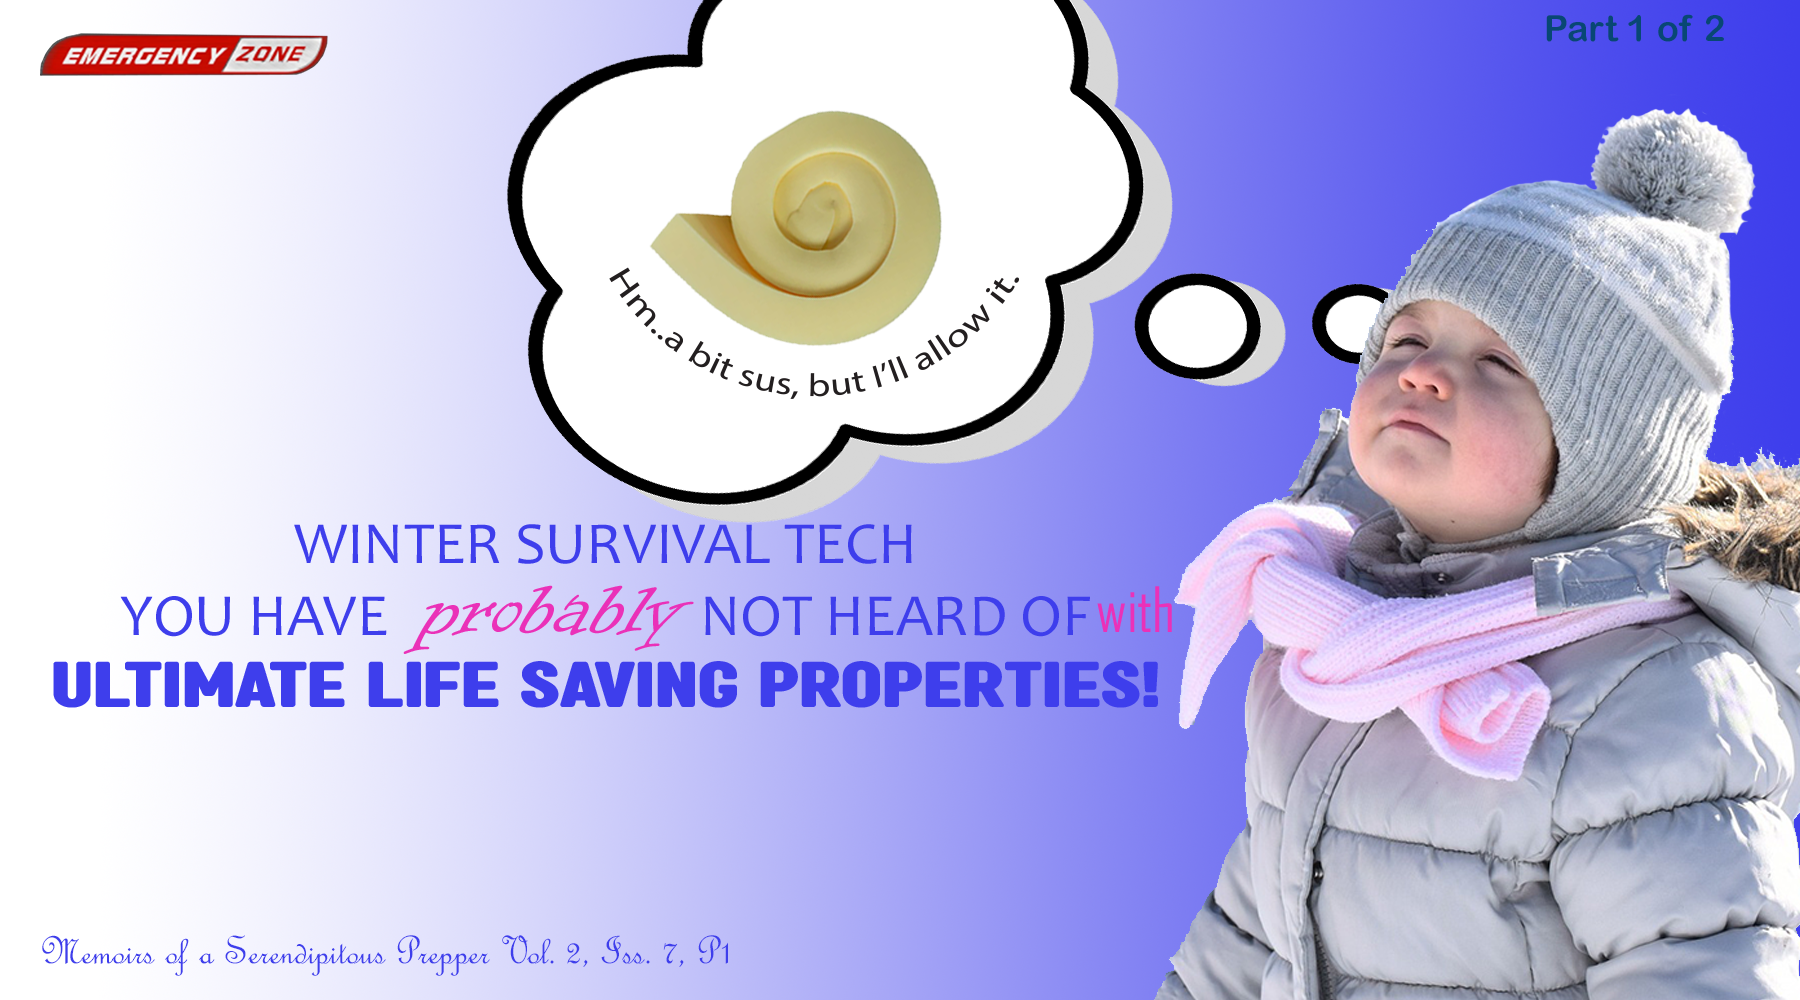 Winter Survival Tech You Have Probably Not Heard of with ULTIMATE LIFE SAVING PROPERTIES! Part 1 of 2